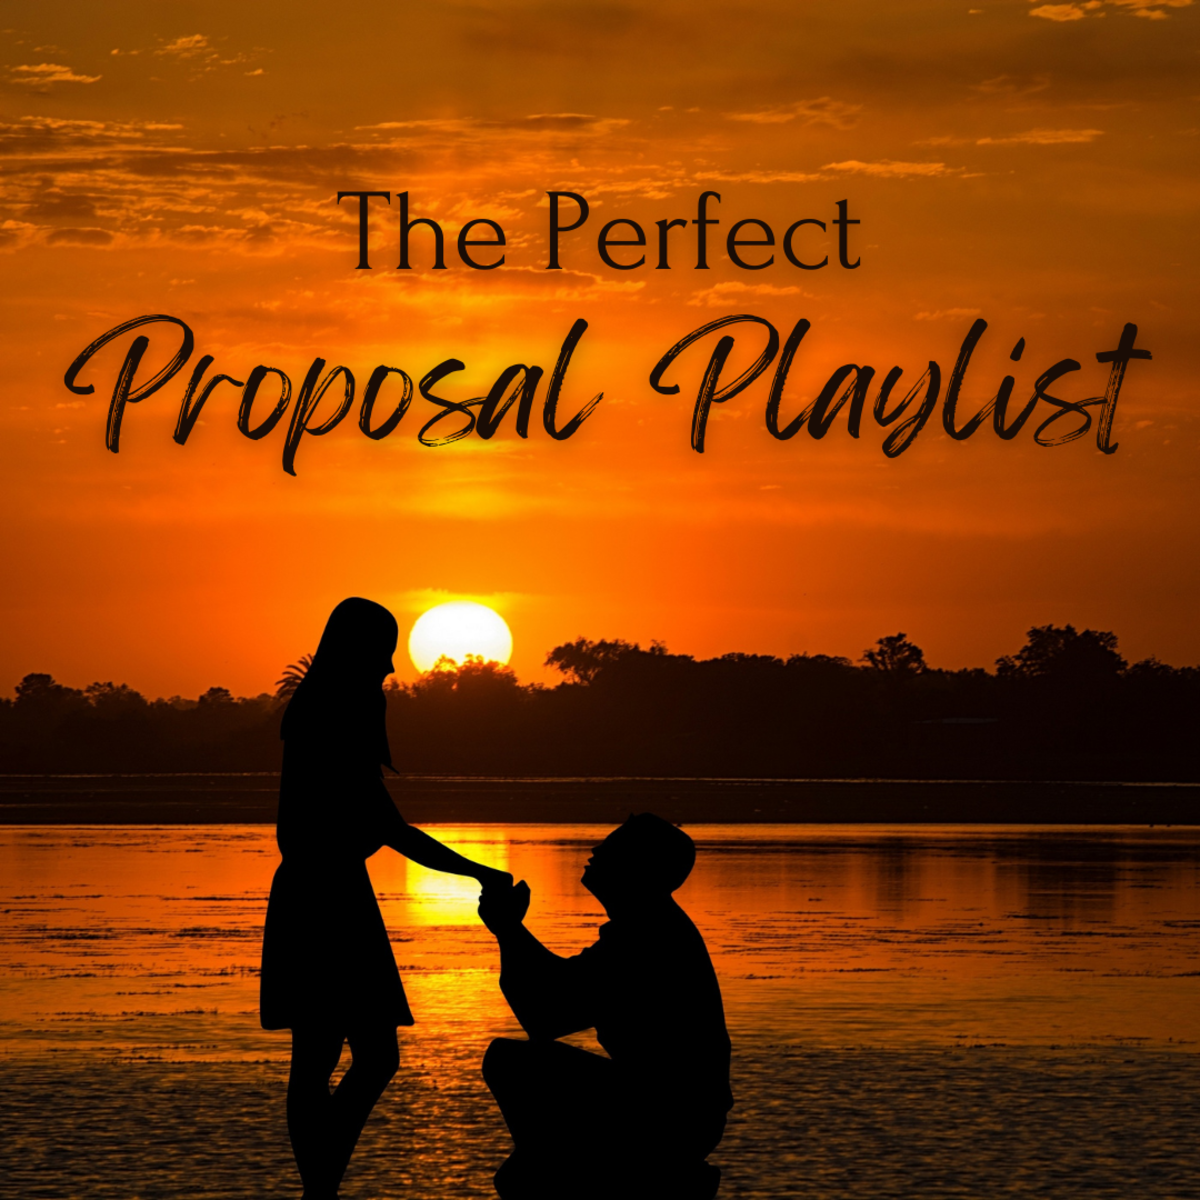 There's no better way to pop the question than with one of these songs playing in the background!